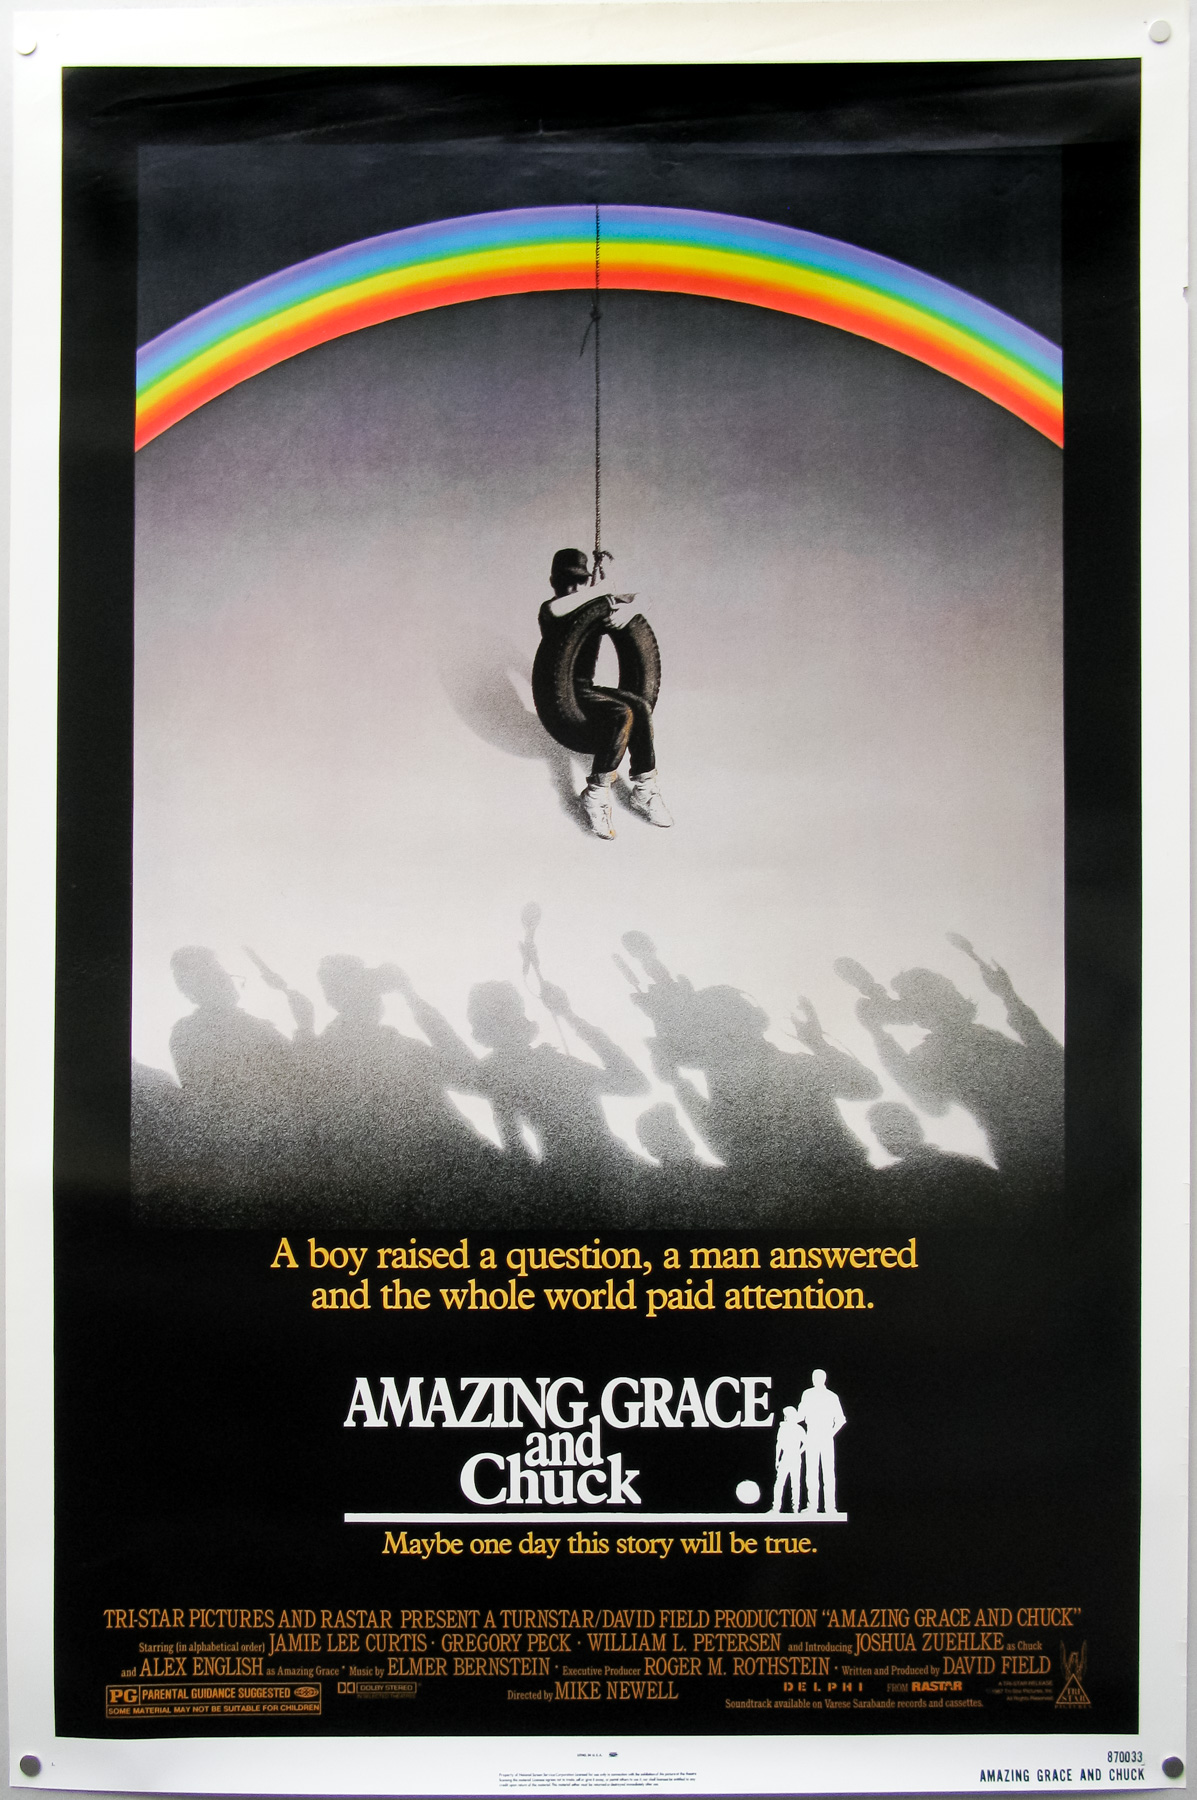 AMAZING GRACE AND CHUCK MOVIE POSTER Original SS27x41 Baseball Film GREGORY PECK 